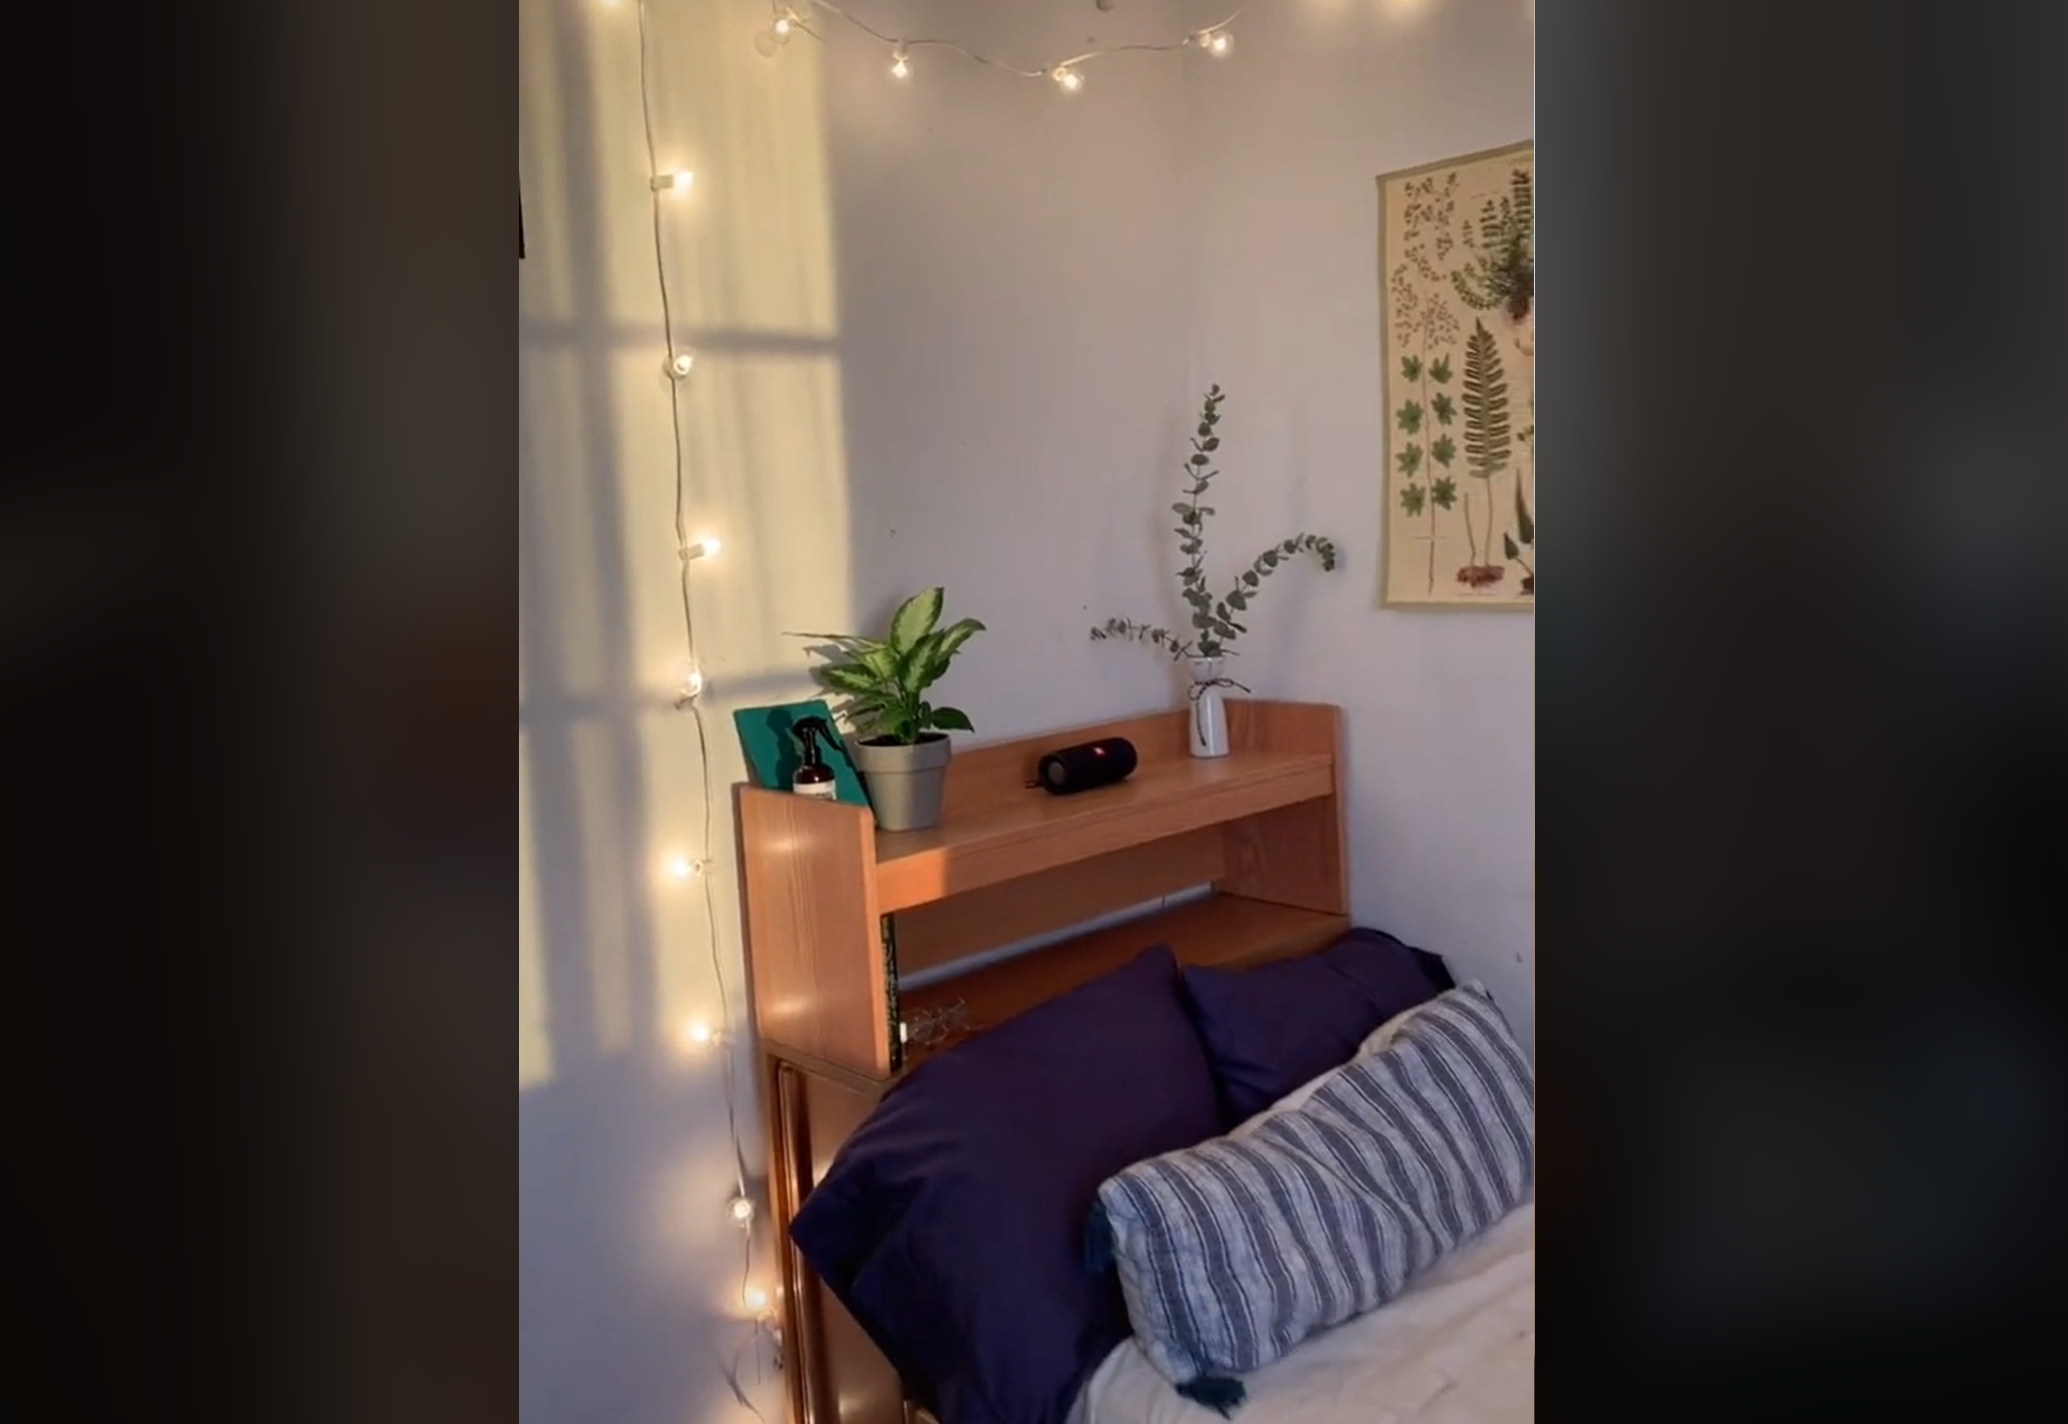 WATCH: Service members are showing off their barracks rooms in this new ‘MTV Cribs’ type trend